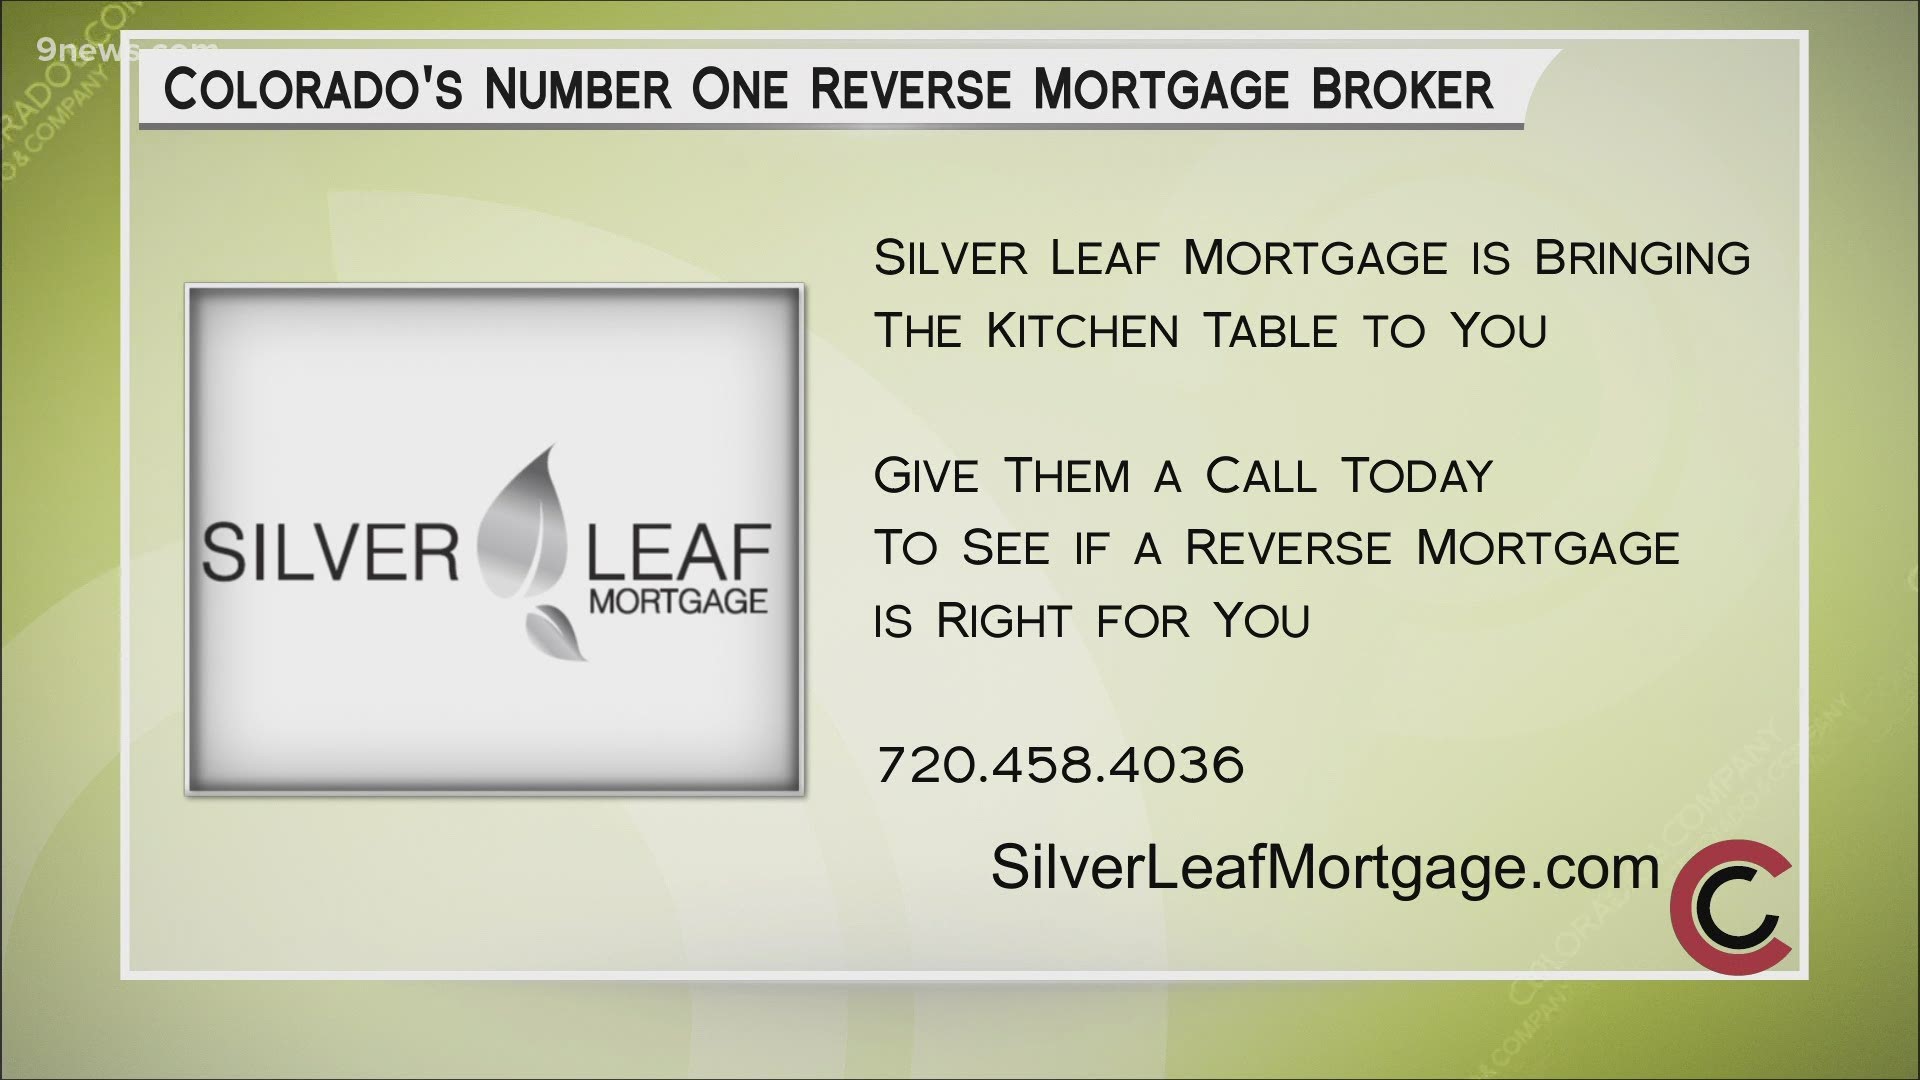 Call 720.458.4036 or visit SilverLeafMortgage.com to find out if a reverse mortgage is right for you.